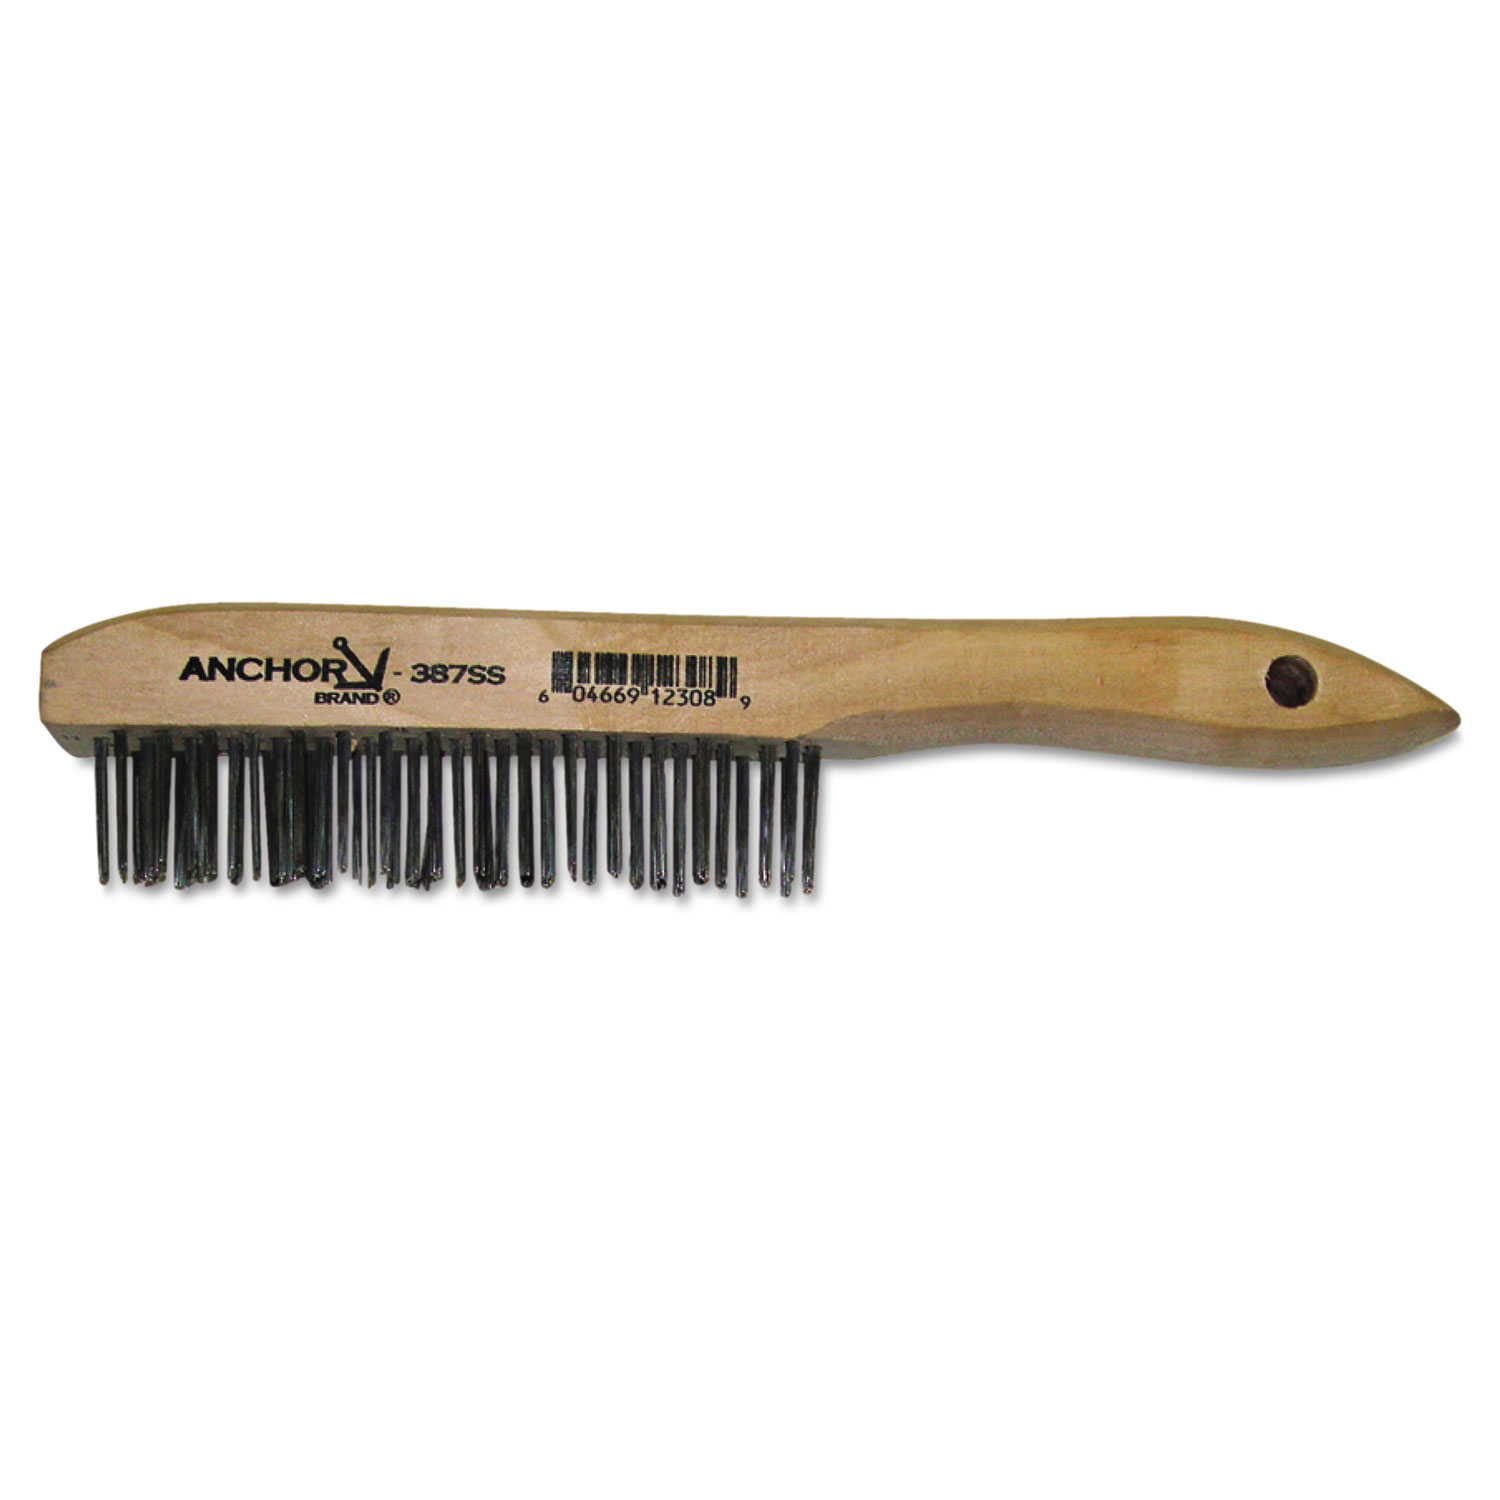  Anchor Brand 94921 Hand Scratch Brush, Stainless Steel Shoe, Wood Handle (ANR387SS) 